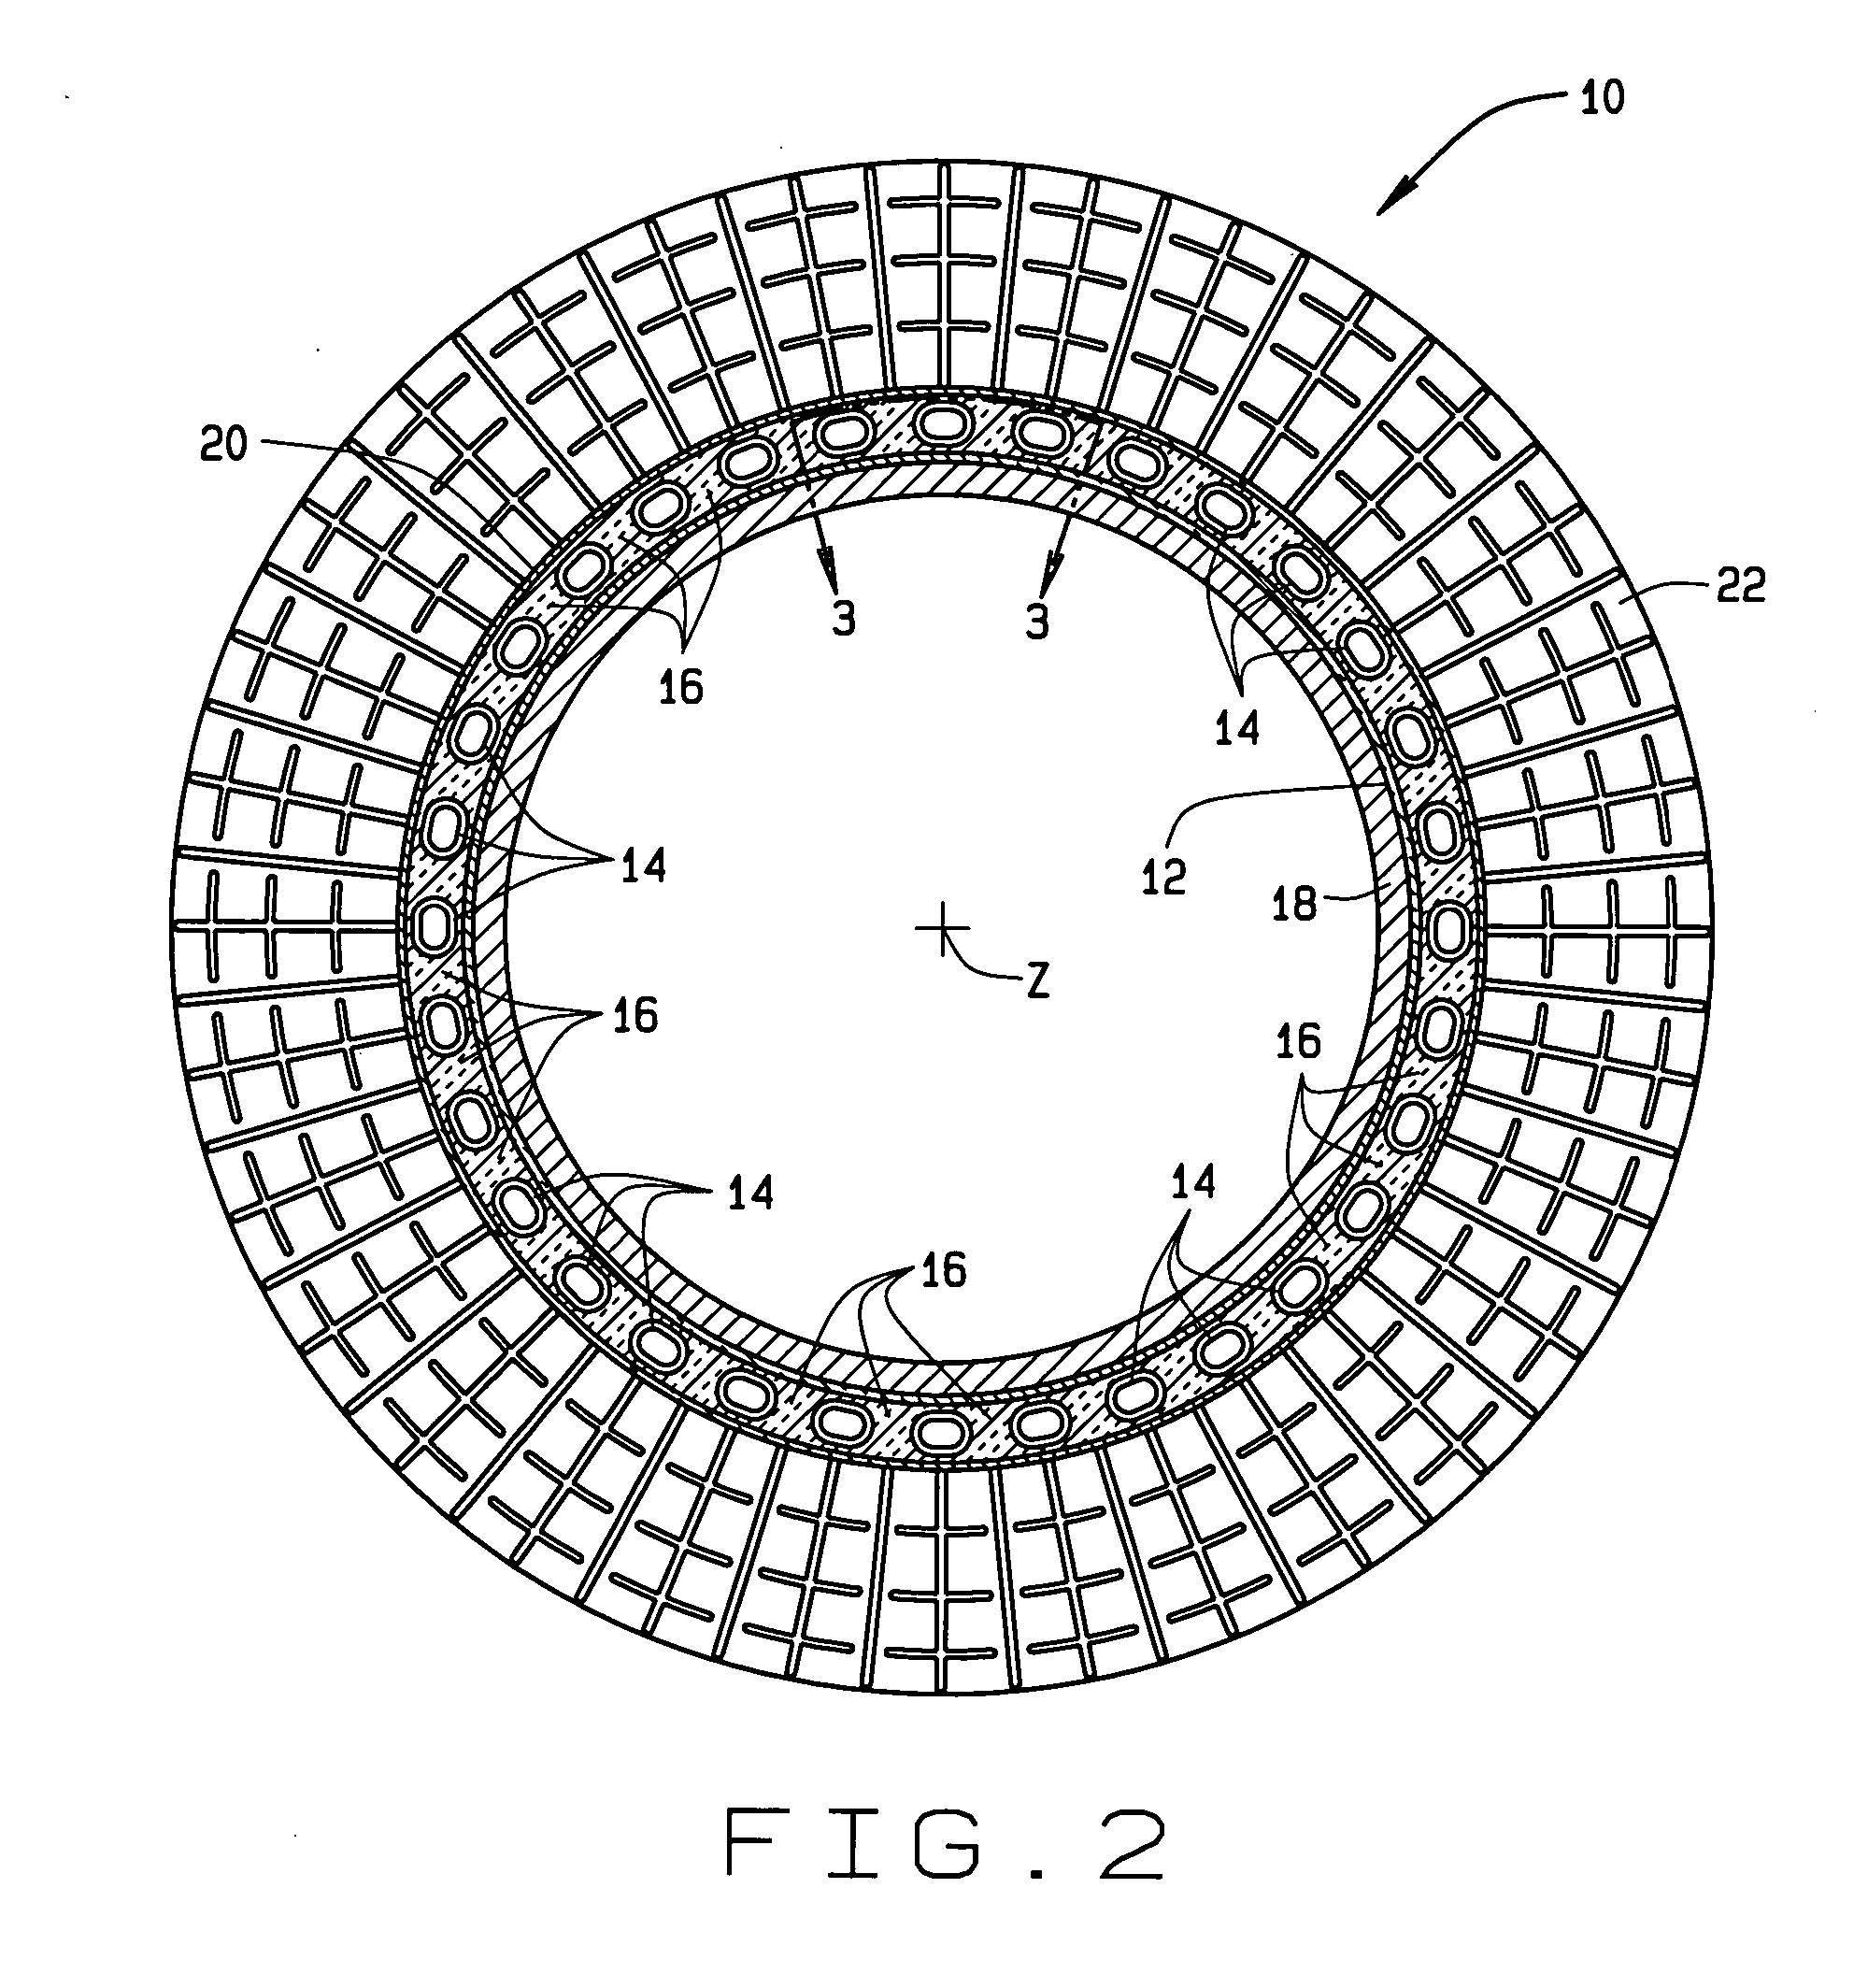 Thermal management apparatus and uses thereof